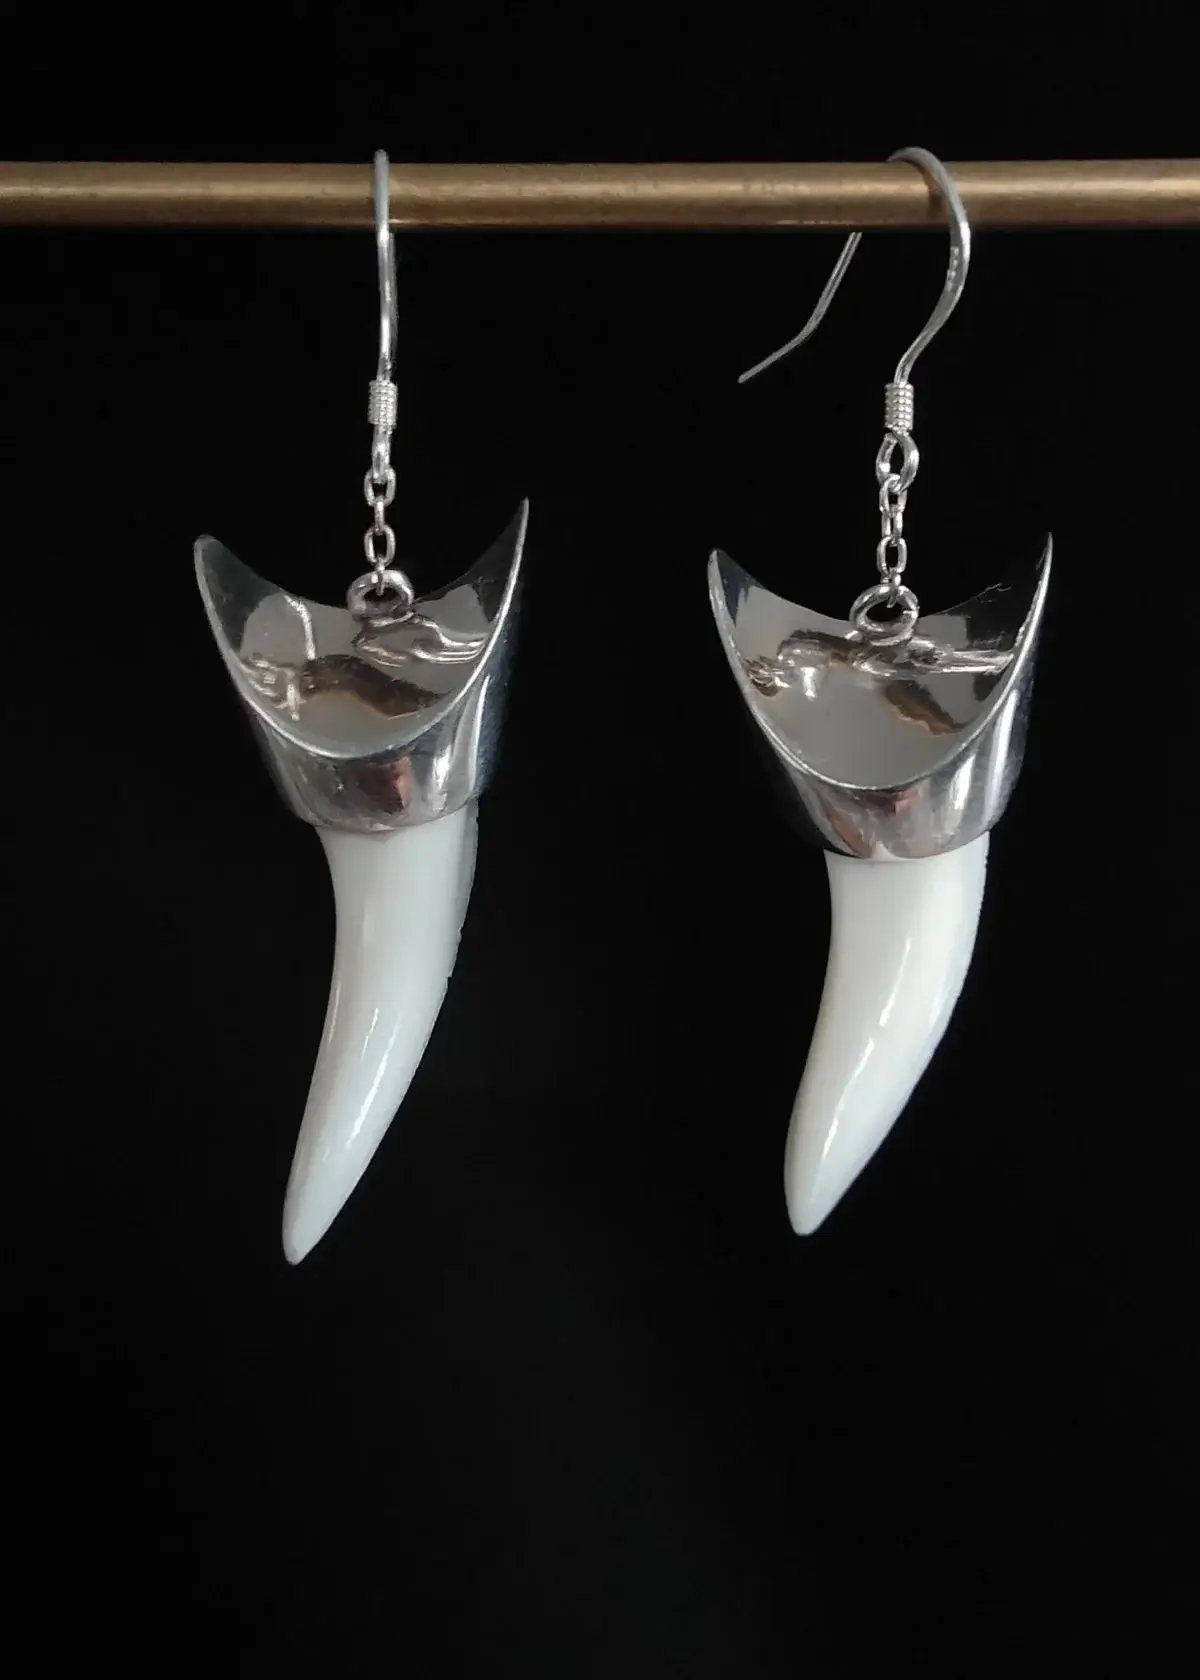 How to Choose the Right Shark Tooth Earrings?